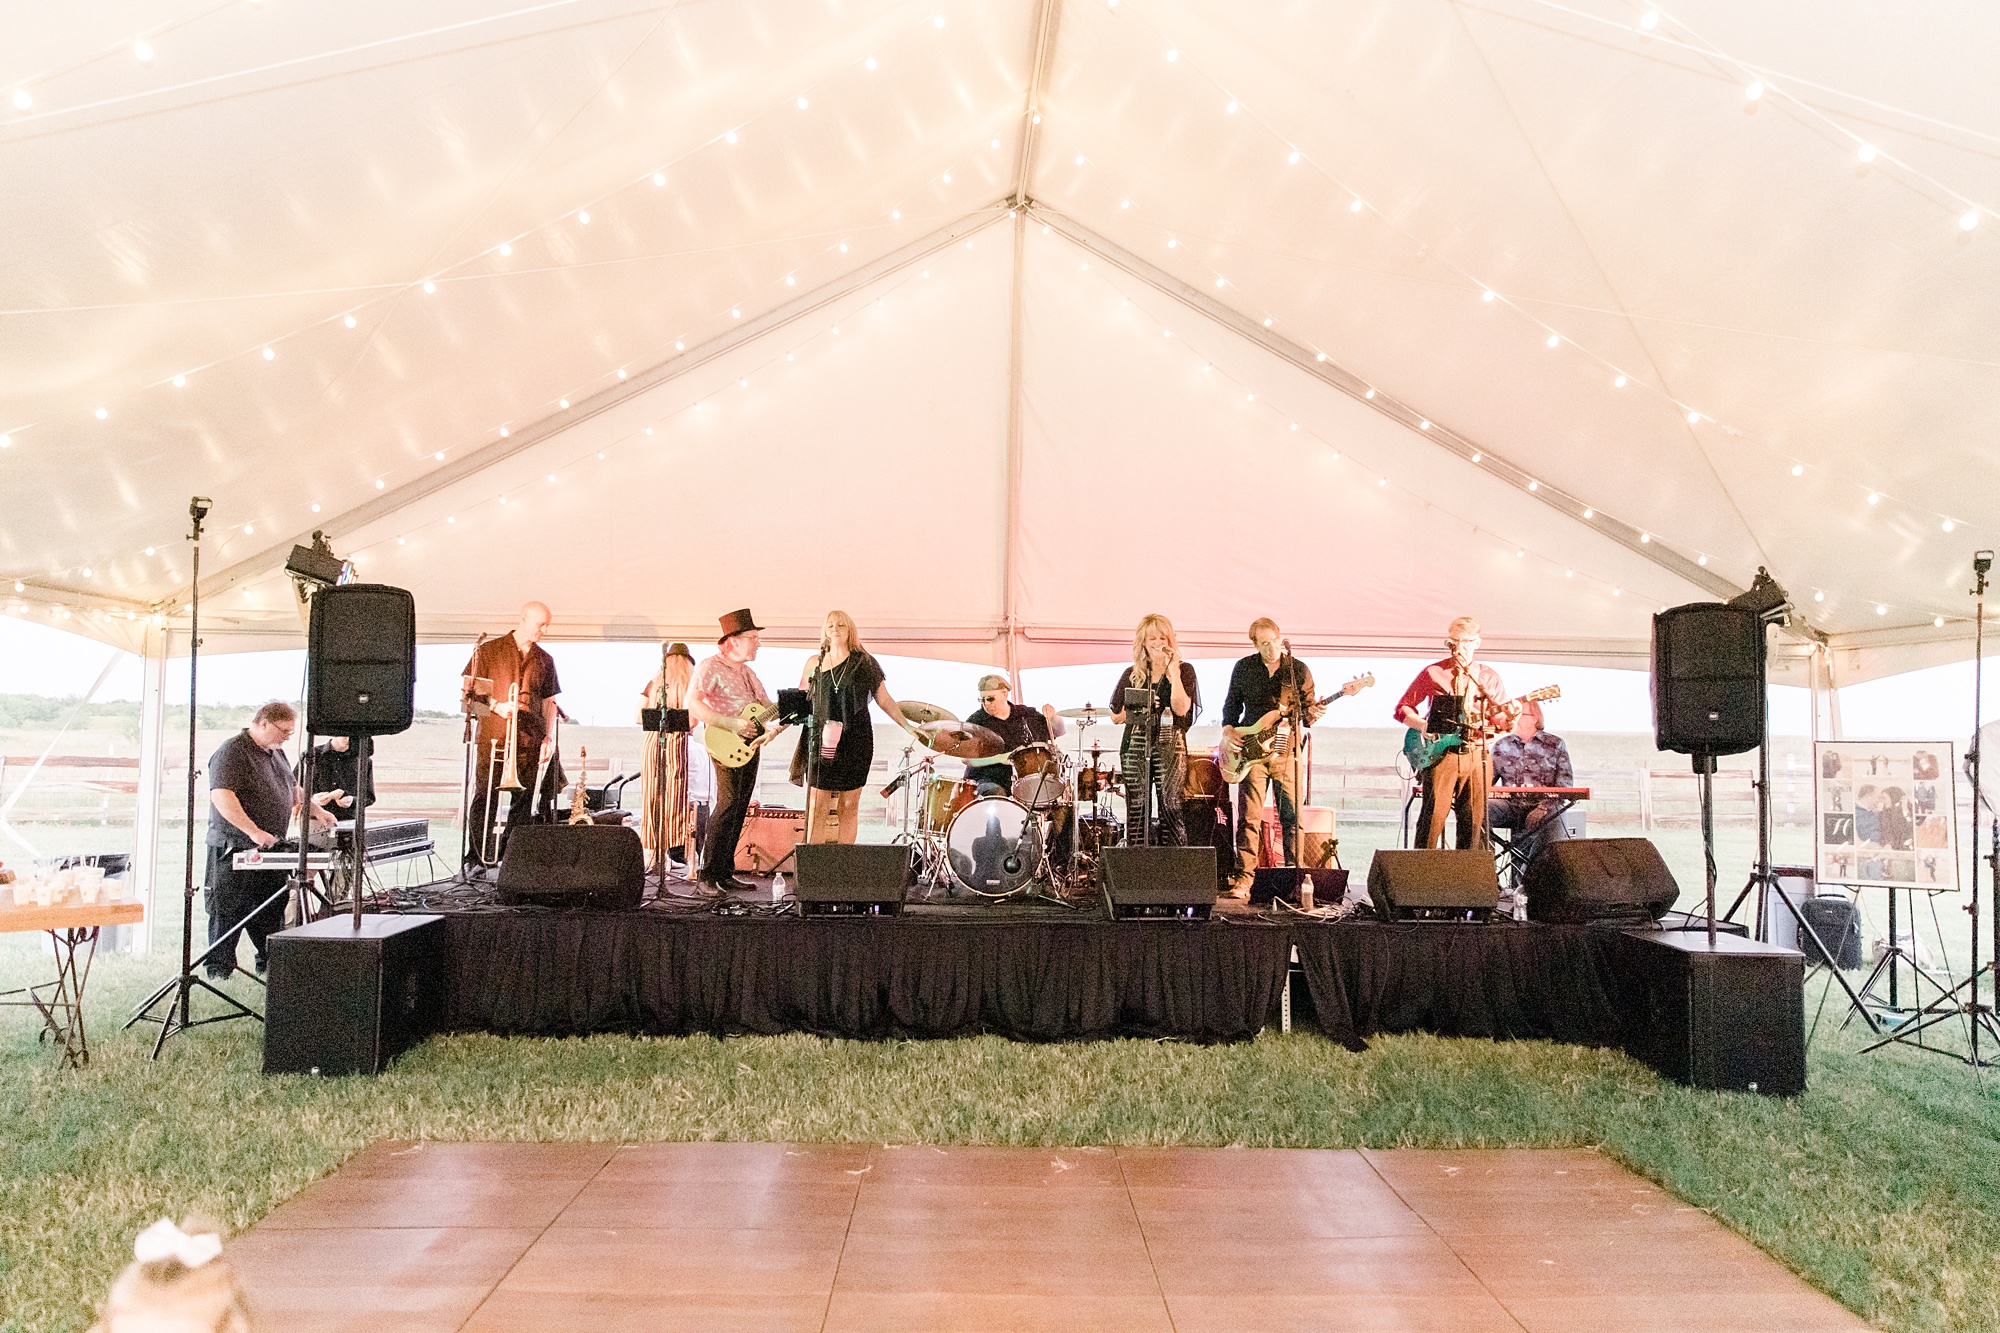 live band plays on stage during Argyle TX wedding reception